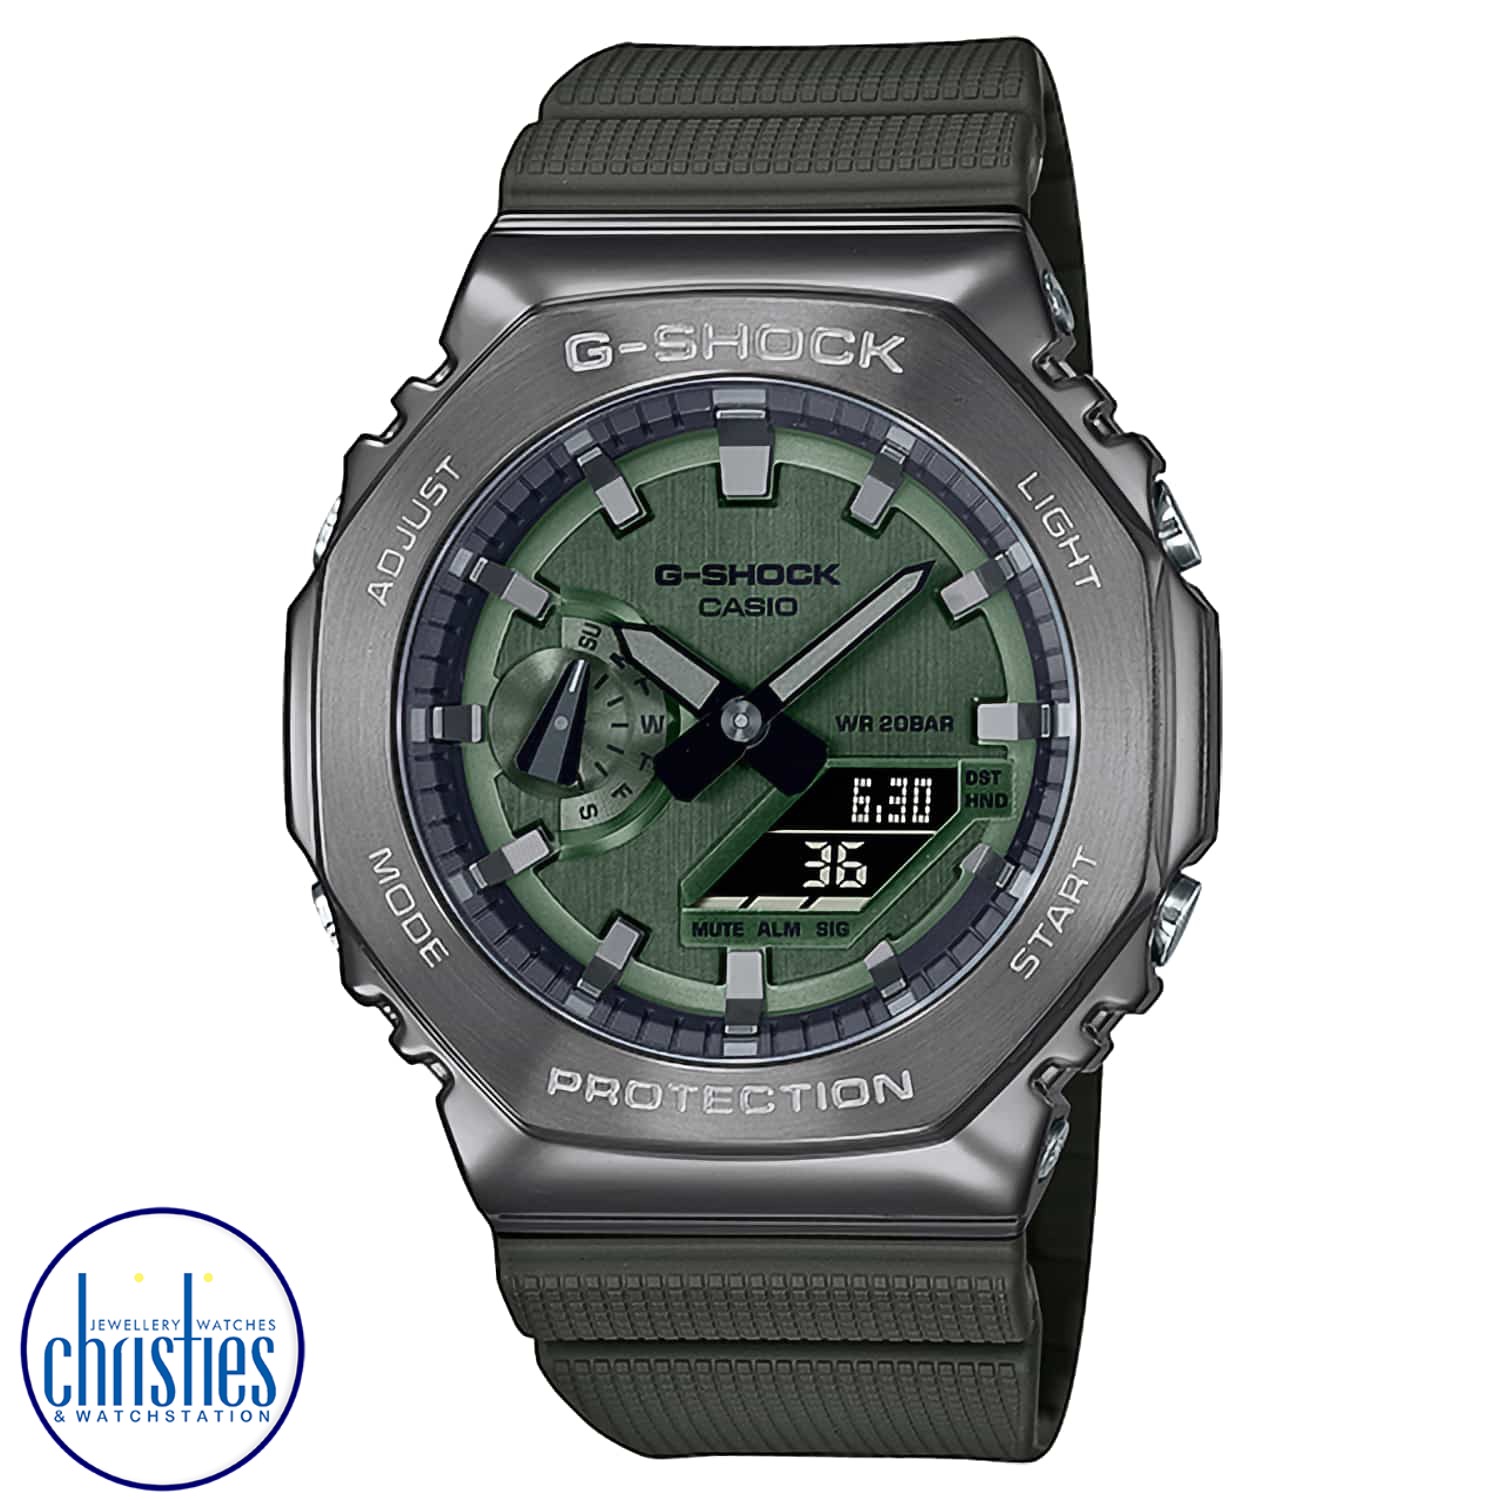 GM2100B-3A G-SHOCK Carbon Core Metal Clad Watch. Go sleek, sharp and bold with a G-SHOCK standard-bearer in a metal-clad octagonal take on the original iconic design. Forged in stainless steel with rounded hairline finish, the strong bezel says super styl